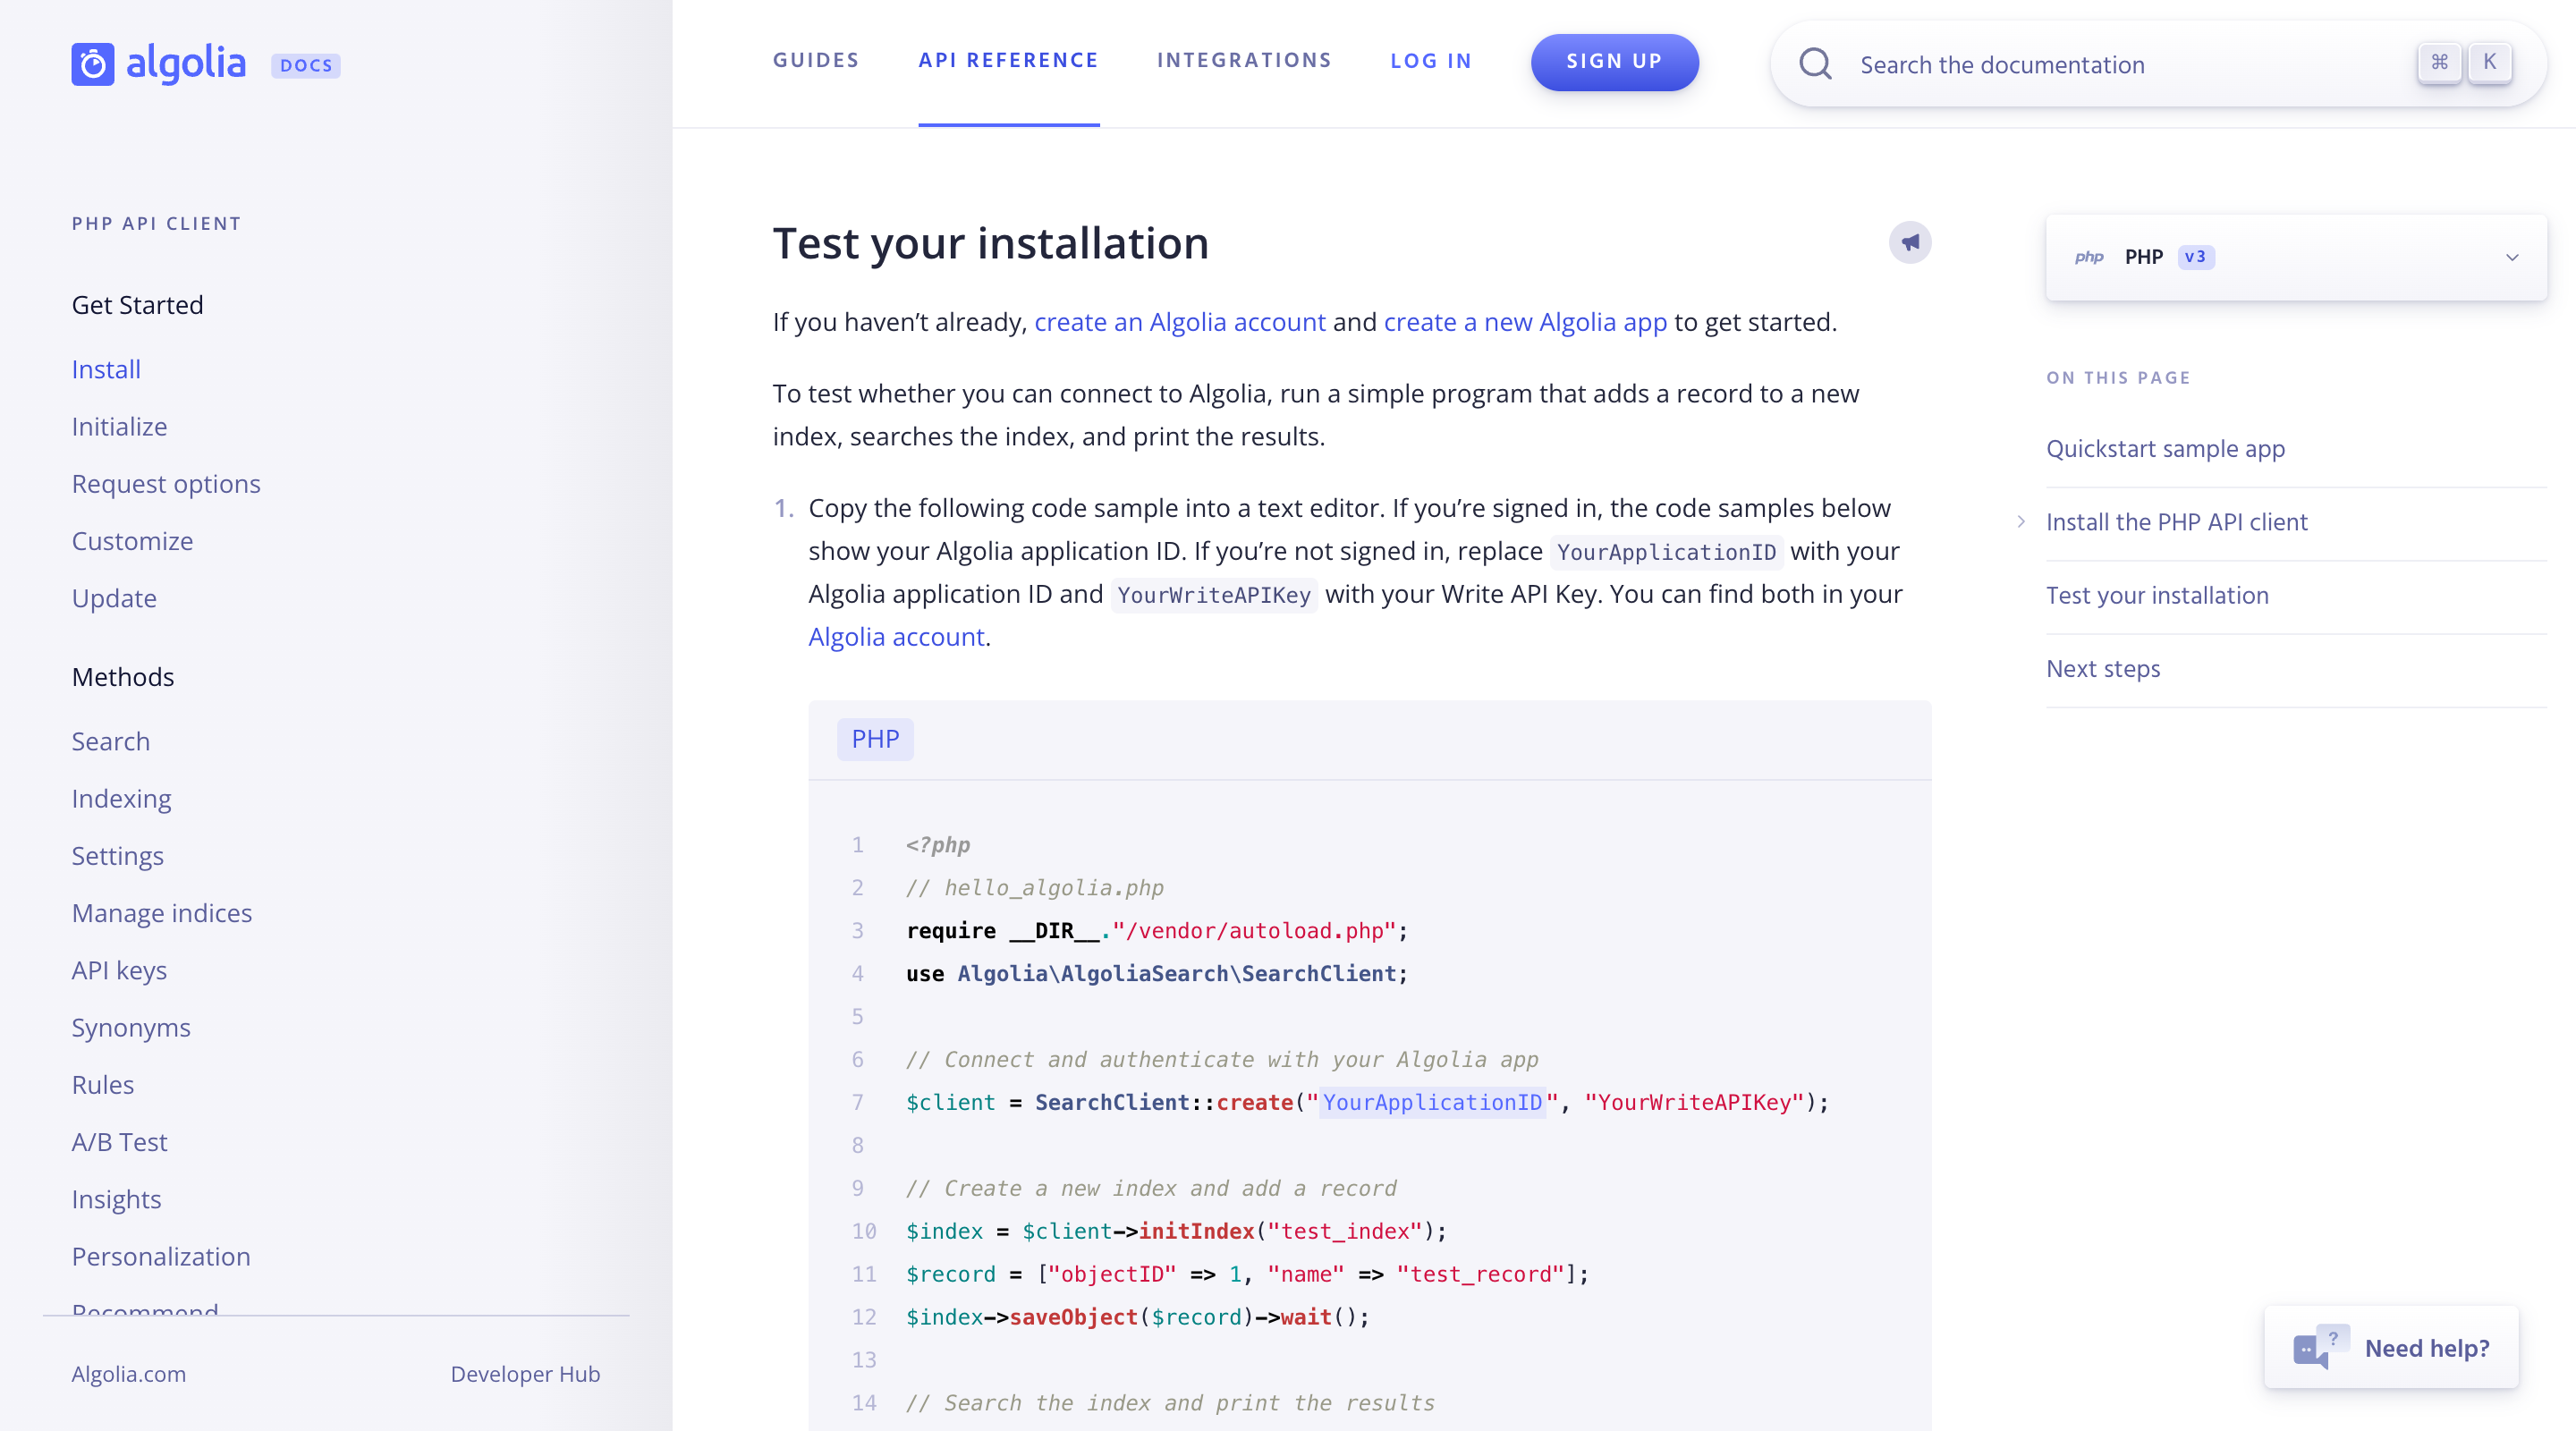 A screenshot of the 'Test your installation' page of the Algolia documentation website. A fixed sidebar lists the various pages within the 'PHP API Client' documentation. An additional sidebar lists the sections of the current page. In the main article a PHP code example is shown following a short introduction.